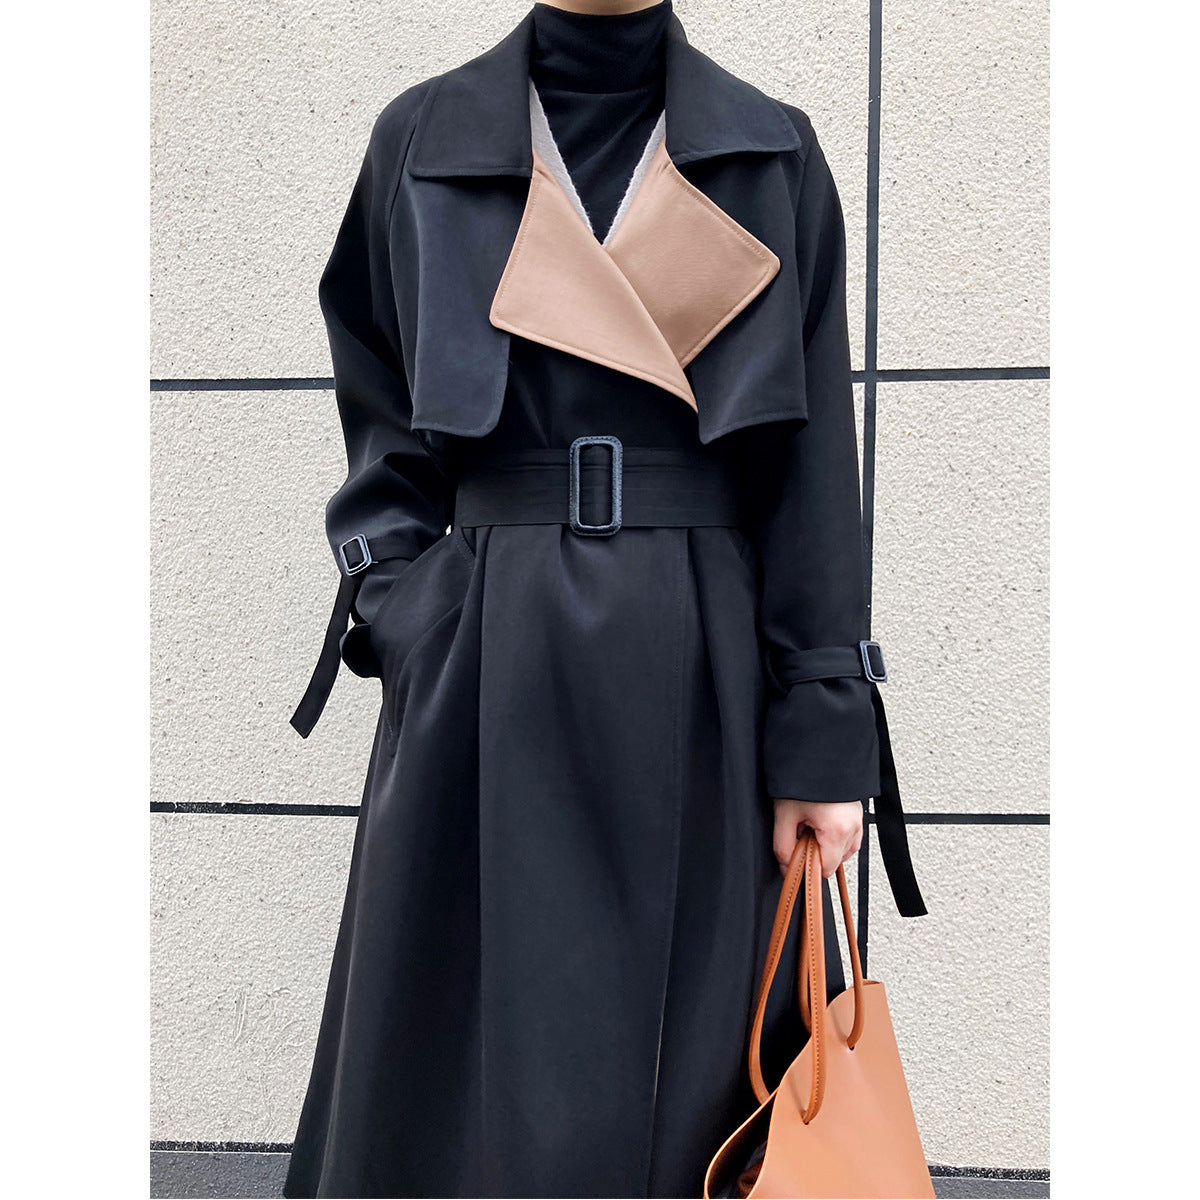 Elegant Stitching Contrast Color Trench Coat Women Mid-Length over-the-Knee Large Collared Waist-Controlled Overcoat